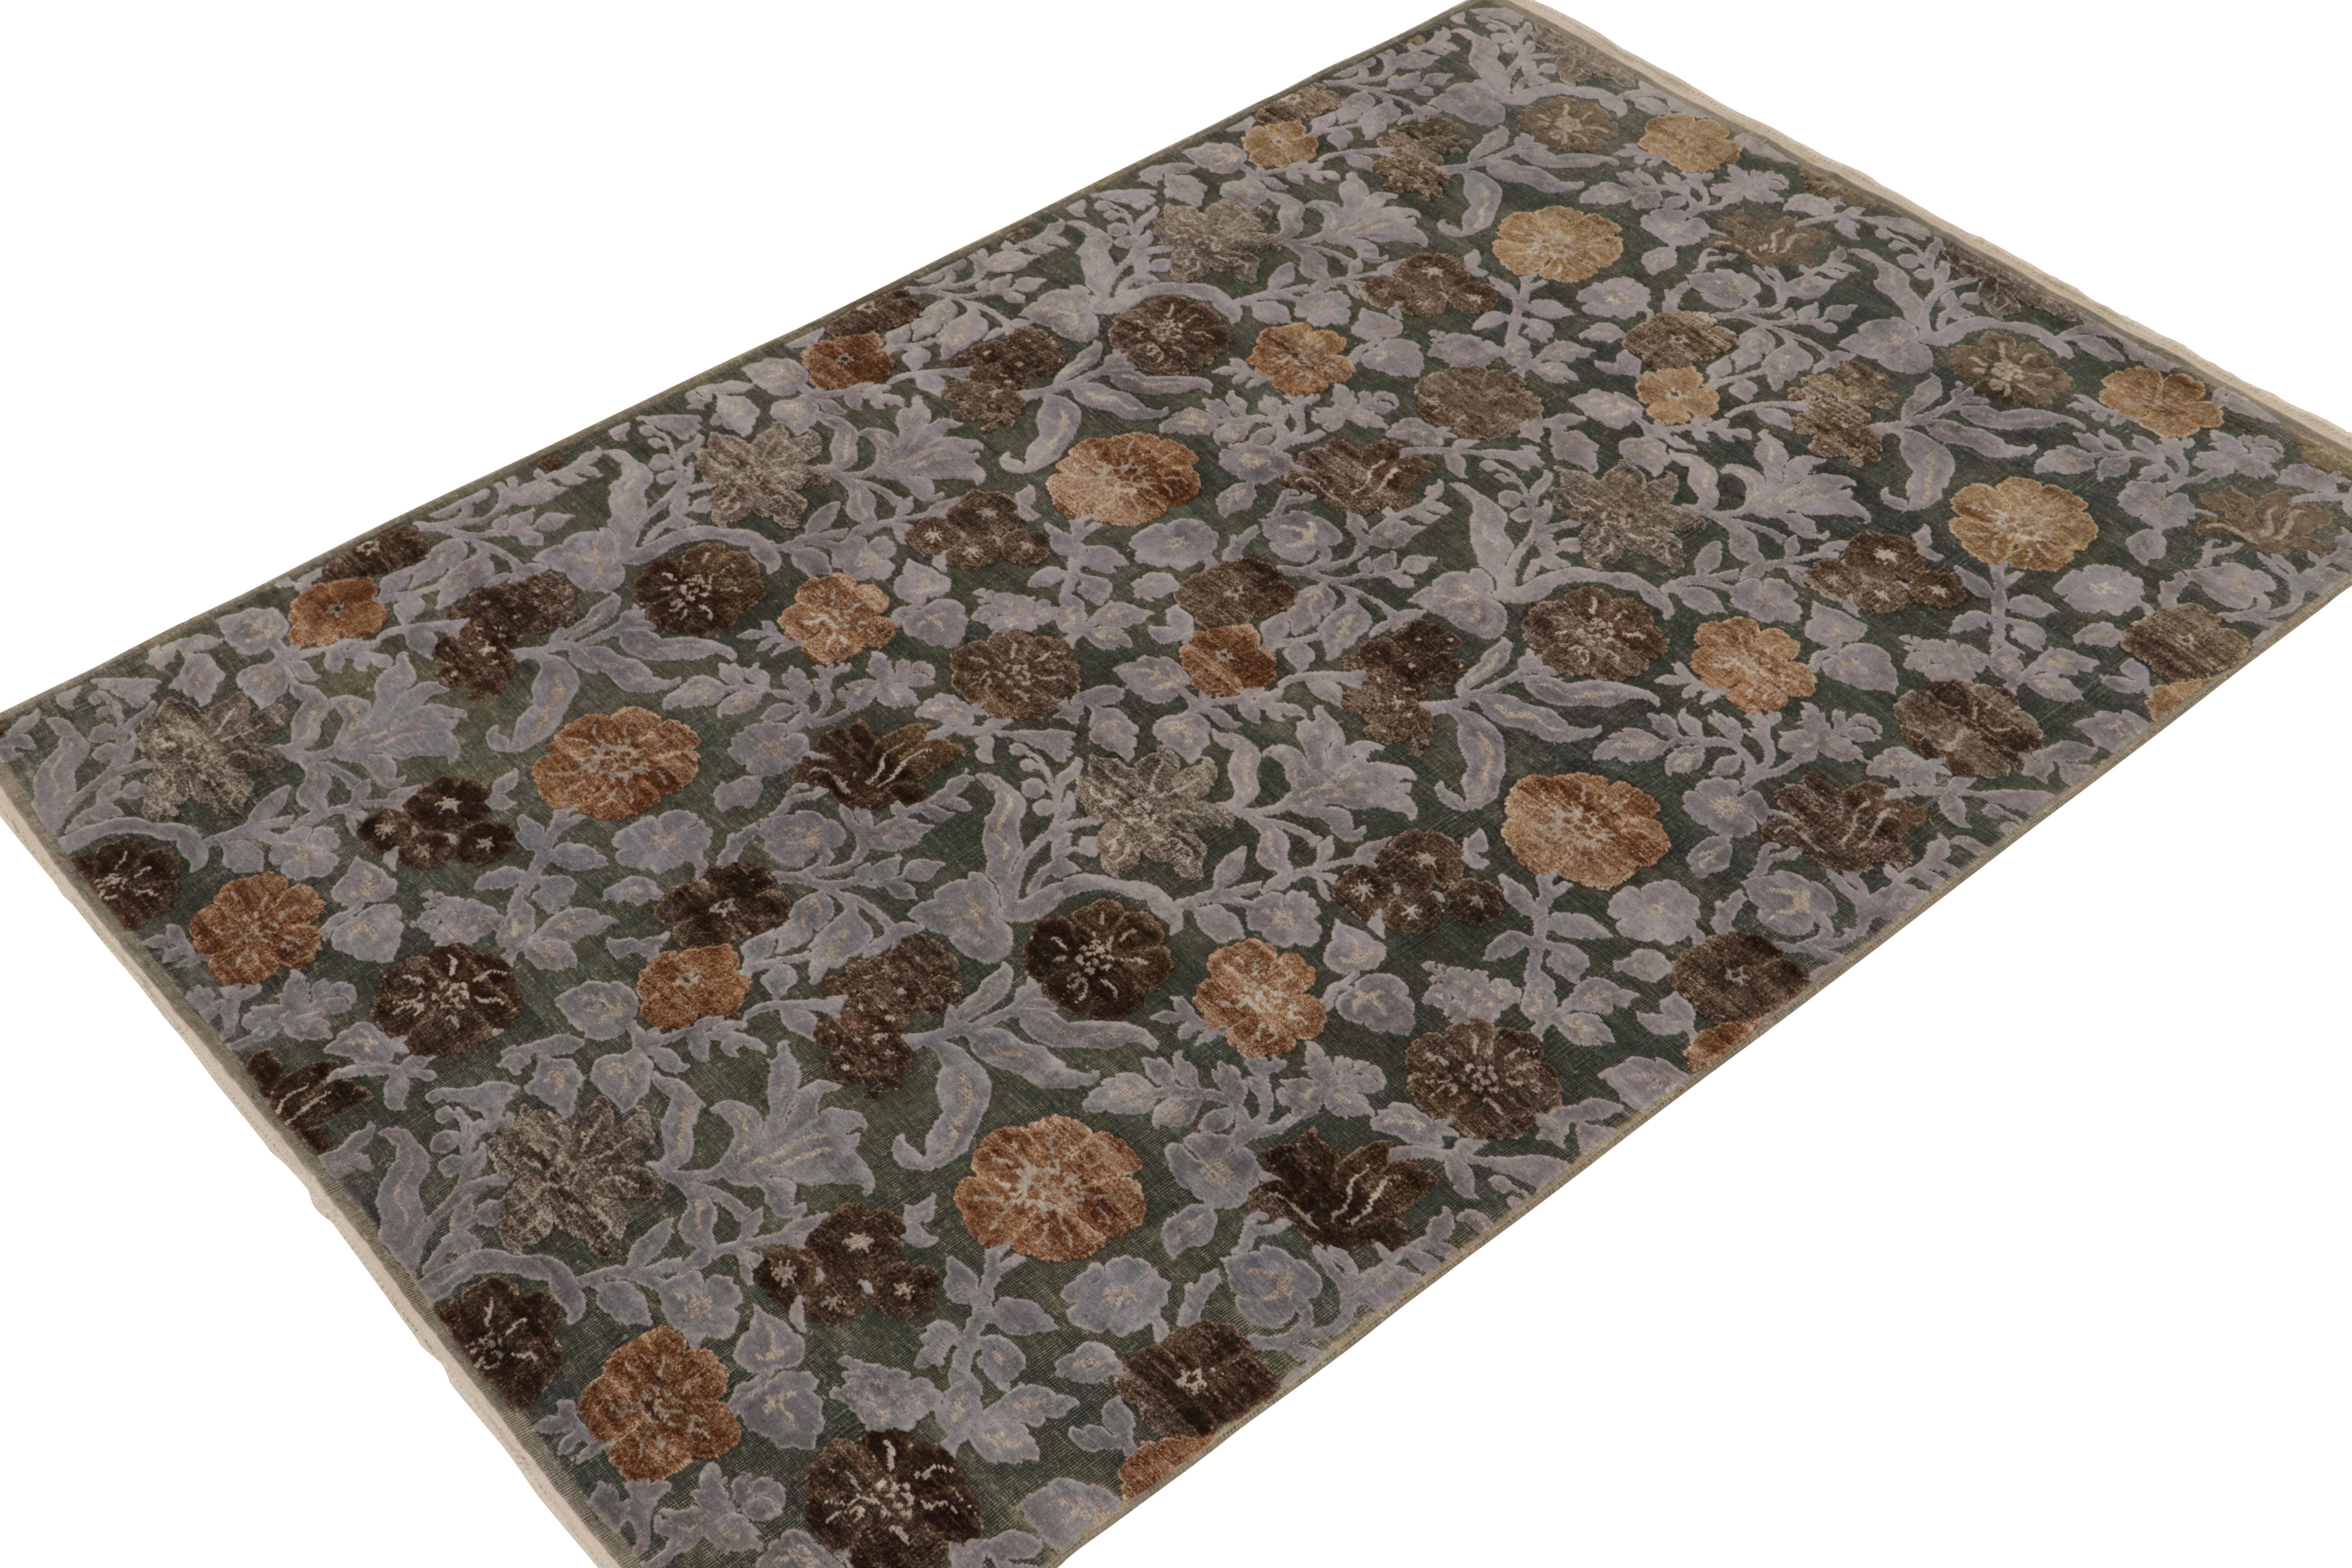 Hand-knotted in a fine blend of wool & silk, this 6x10 contemporary rug from our New & Modern collection is uniquely inspired by classic European styles. Gorgeous floral patterns in beige-brown & blue tones enjoy a high-low textural element in play